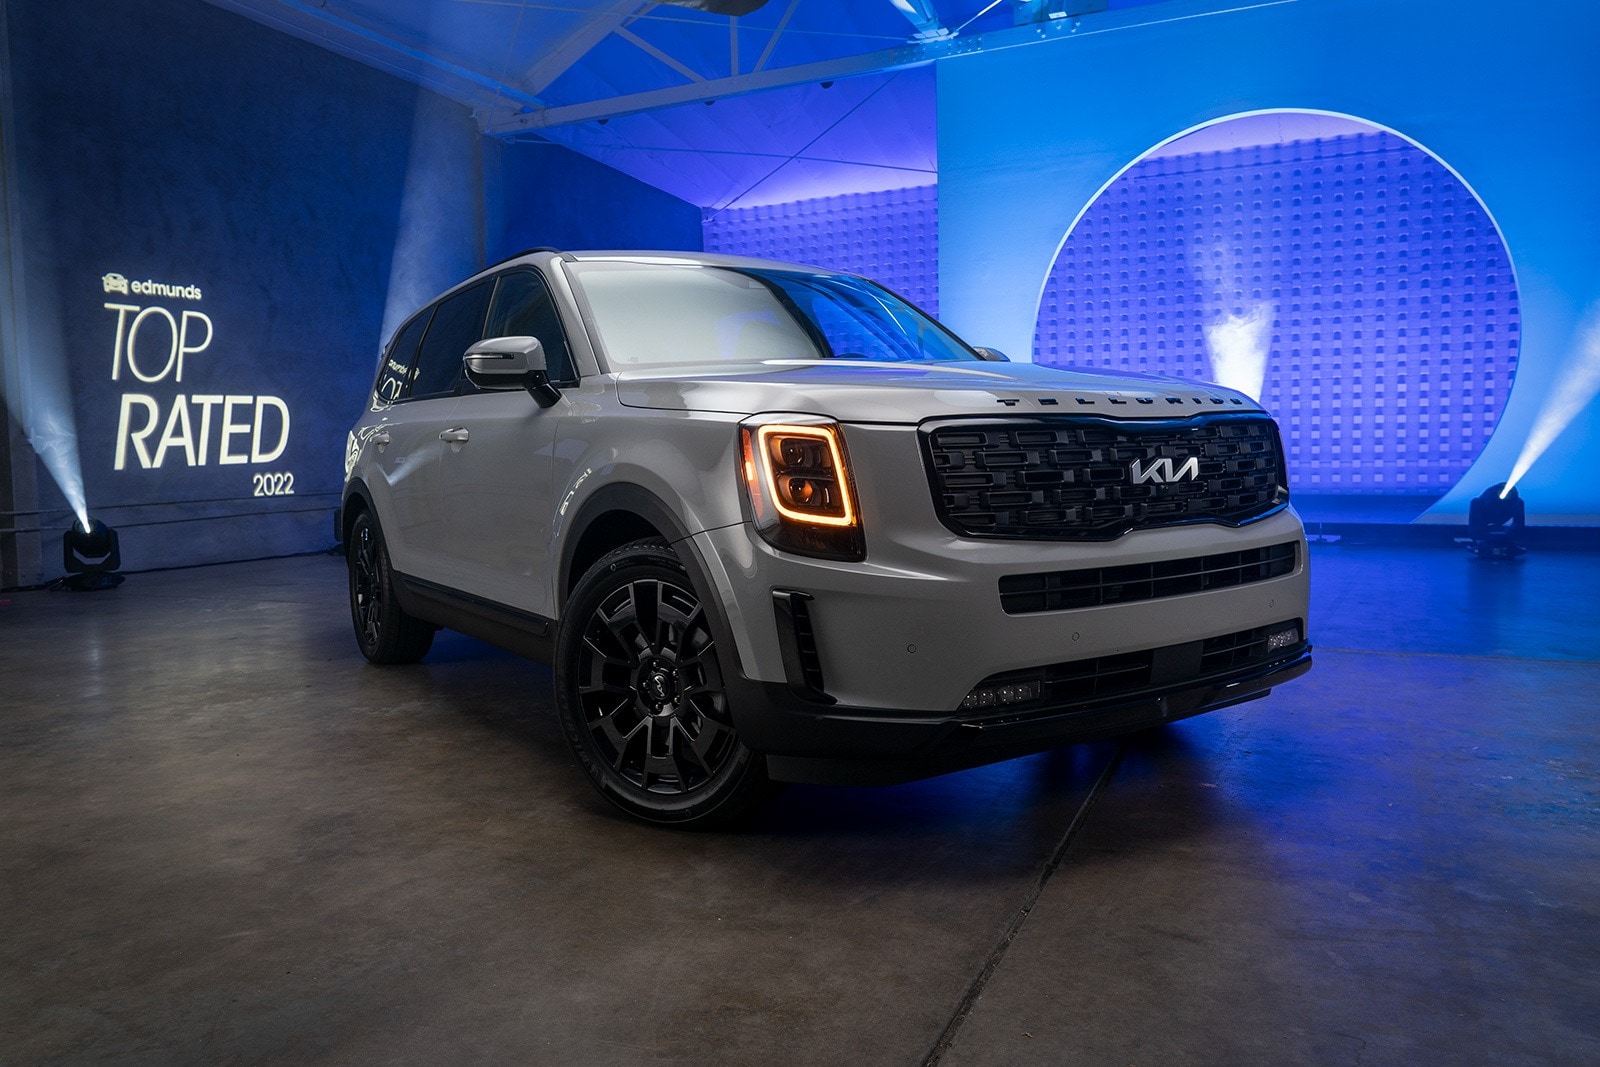 2022 Kia Telluride: Edmunds Top Rated SUV | Edmunds Top Rated Awards 2022